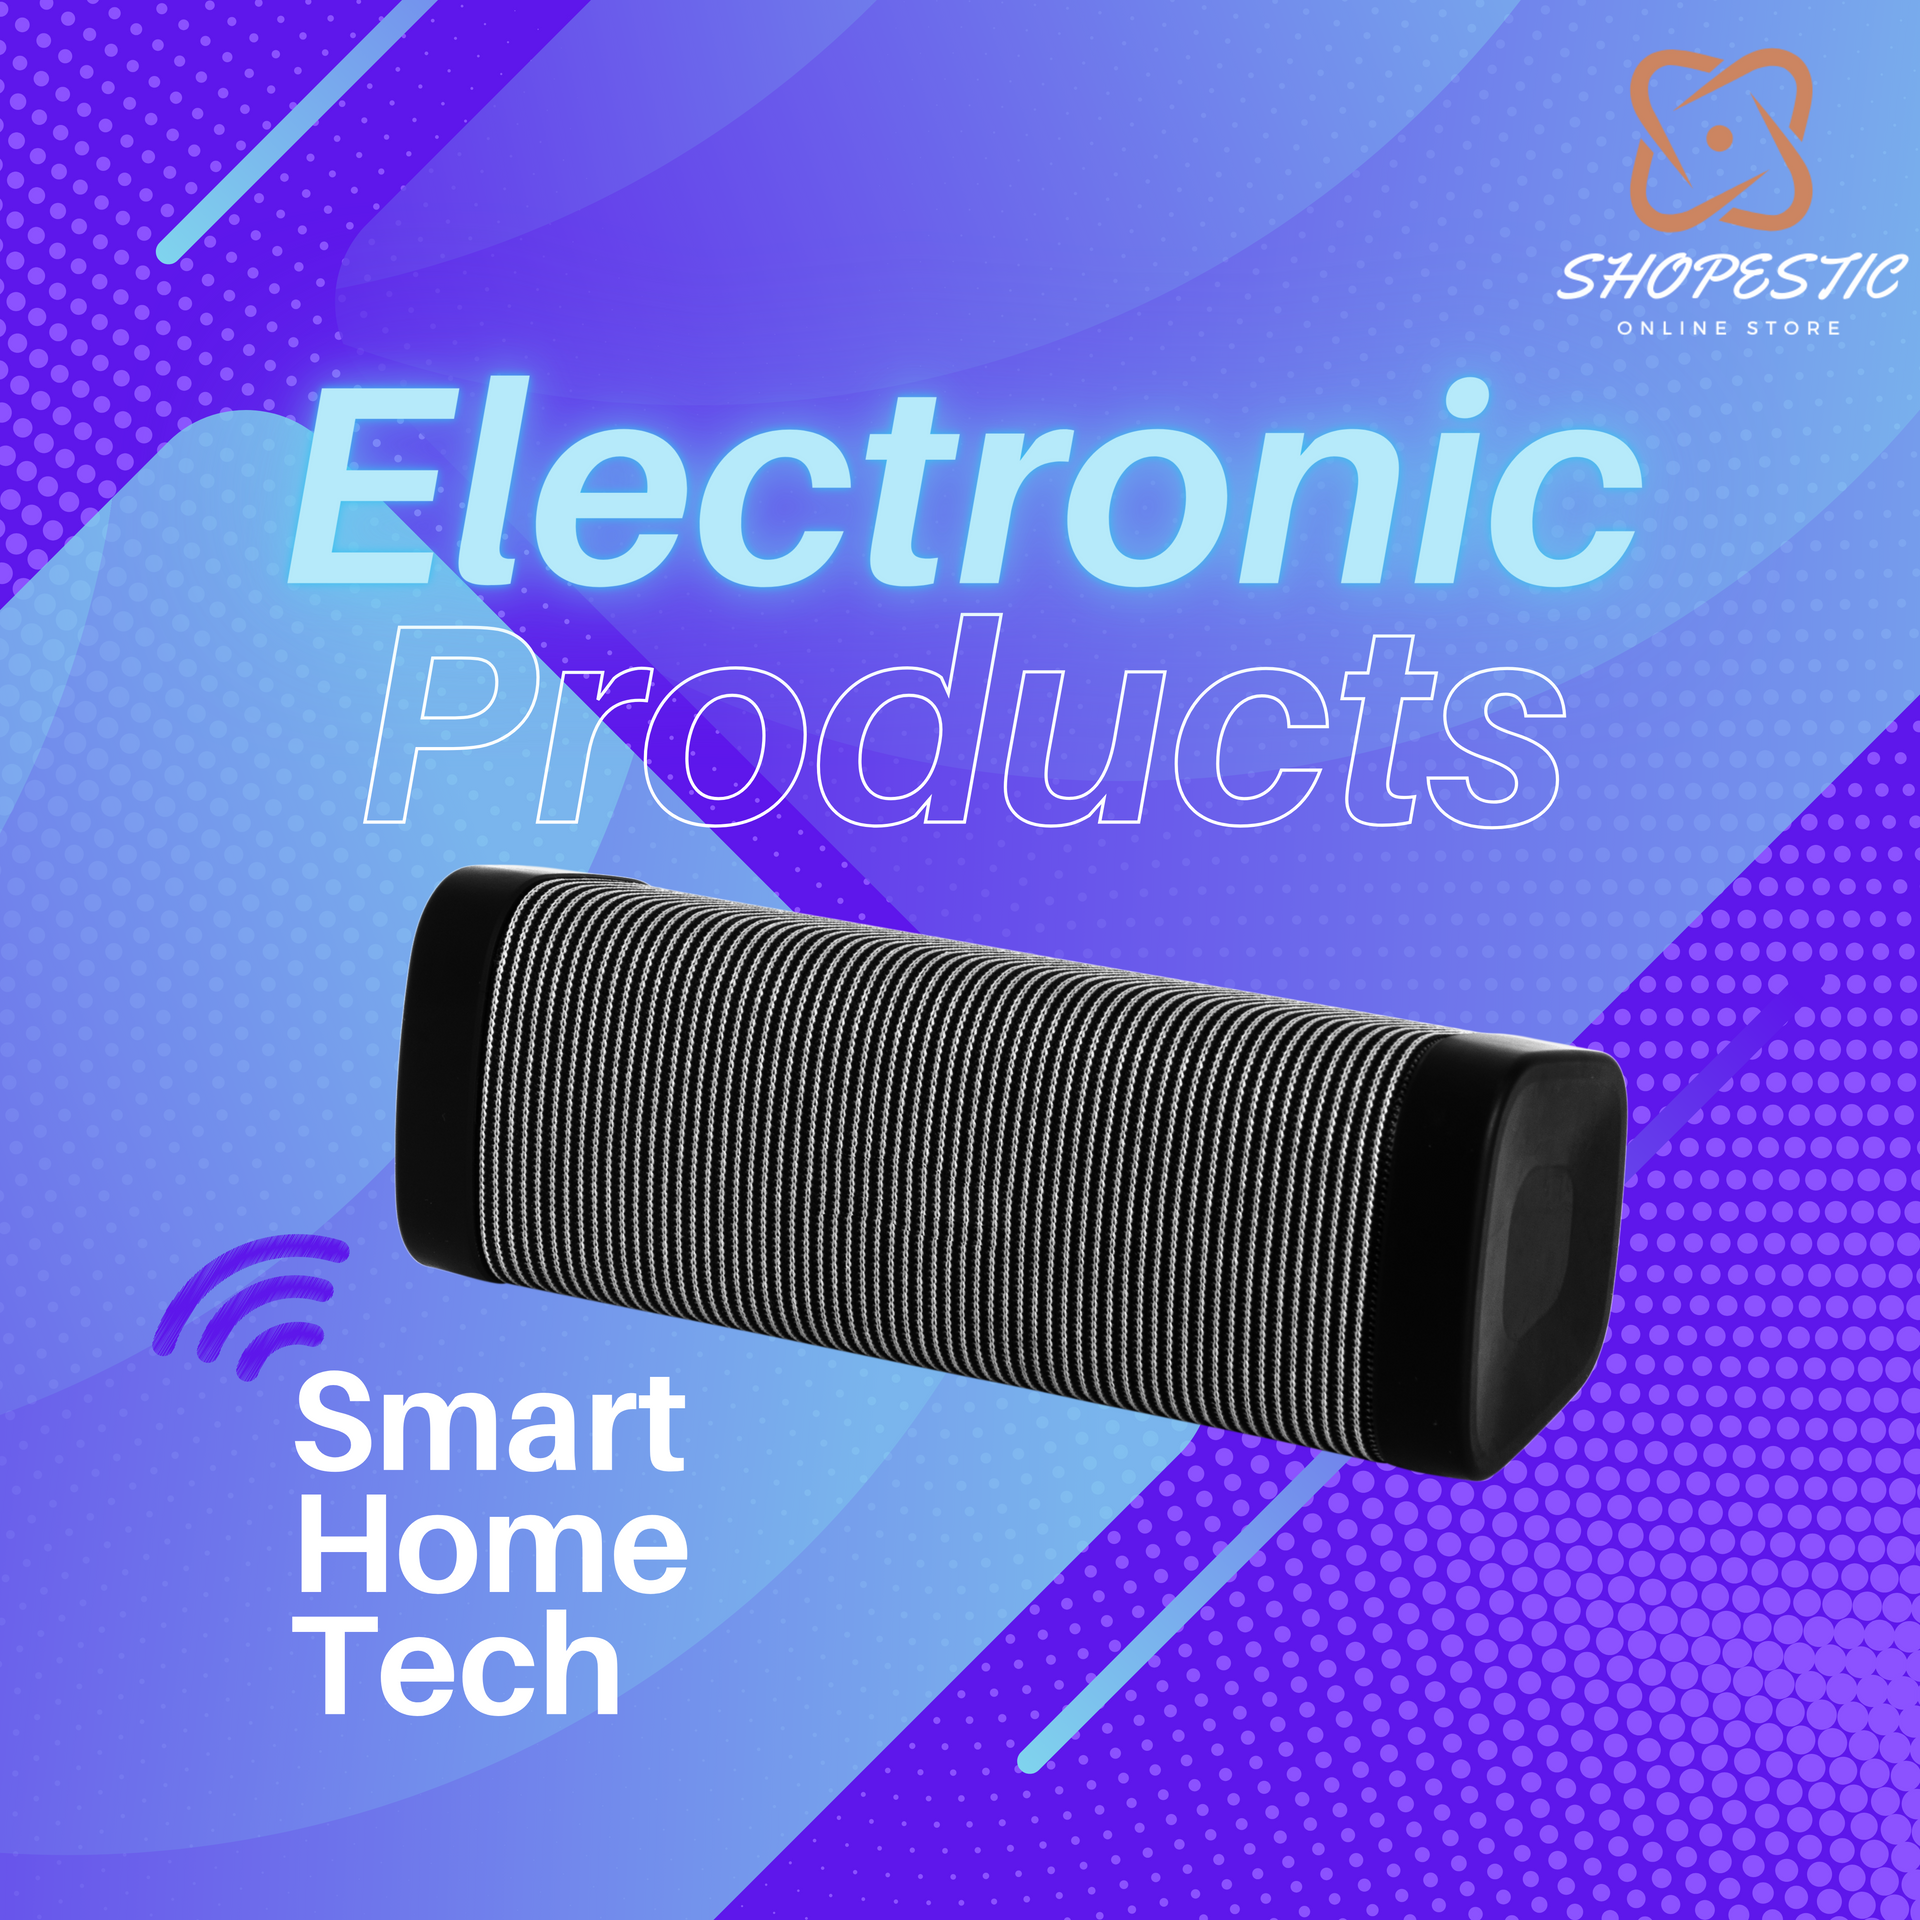 ELECTRONIC PRODUCTS